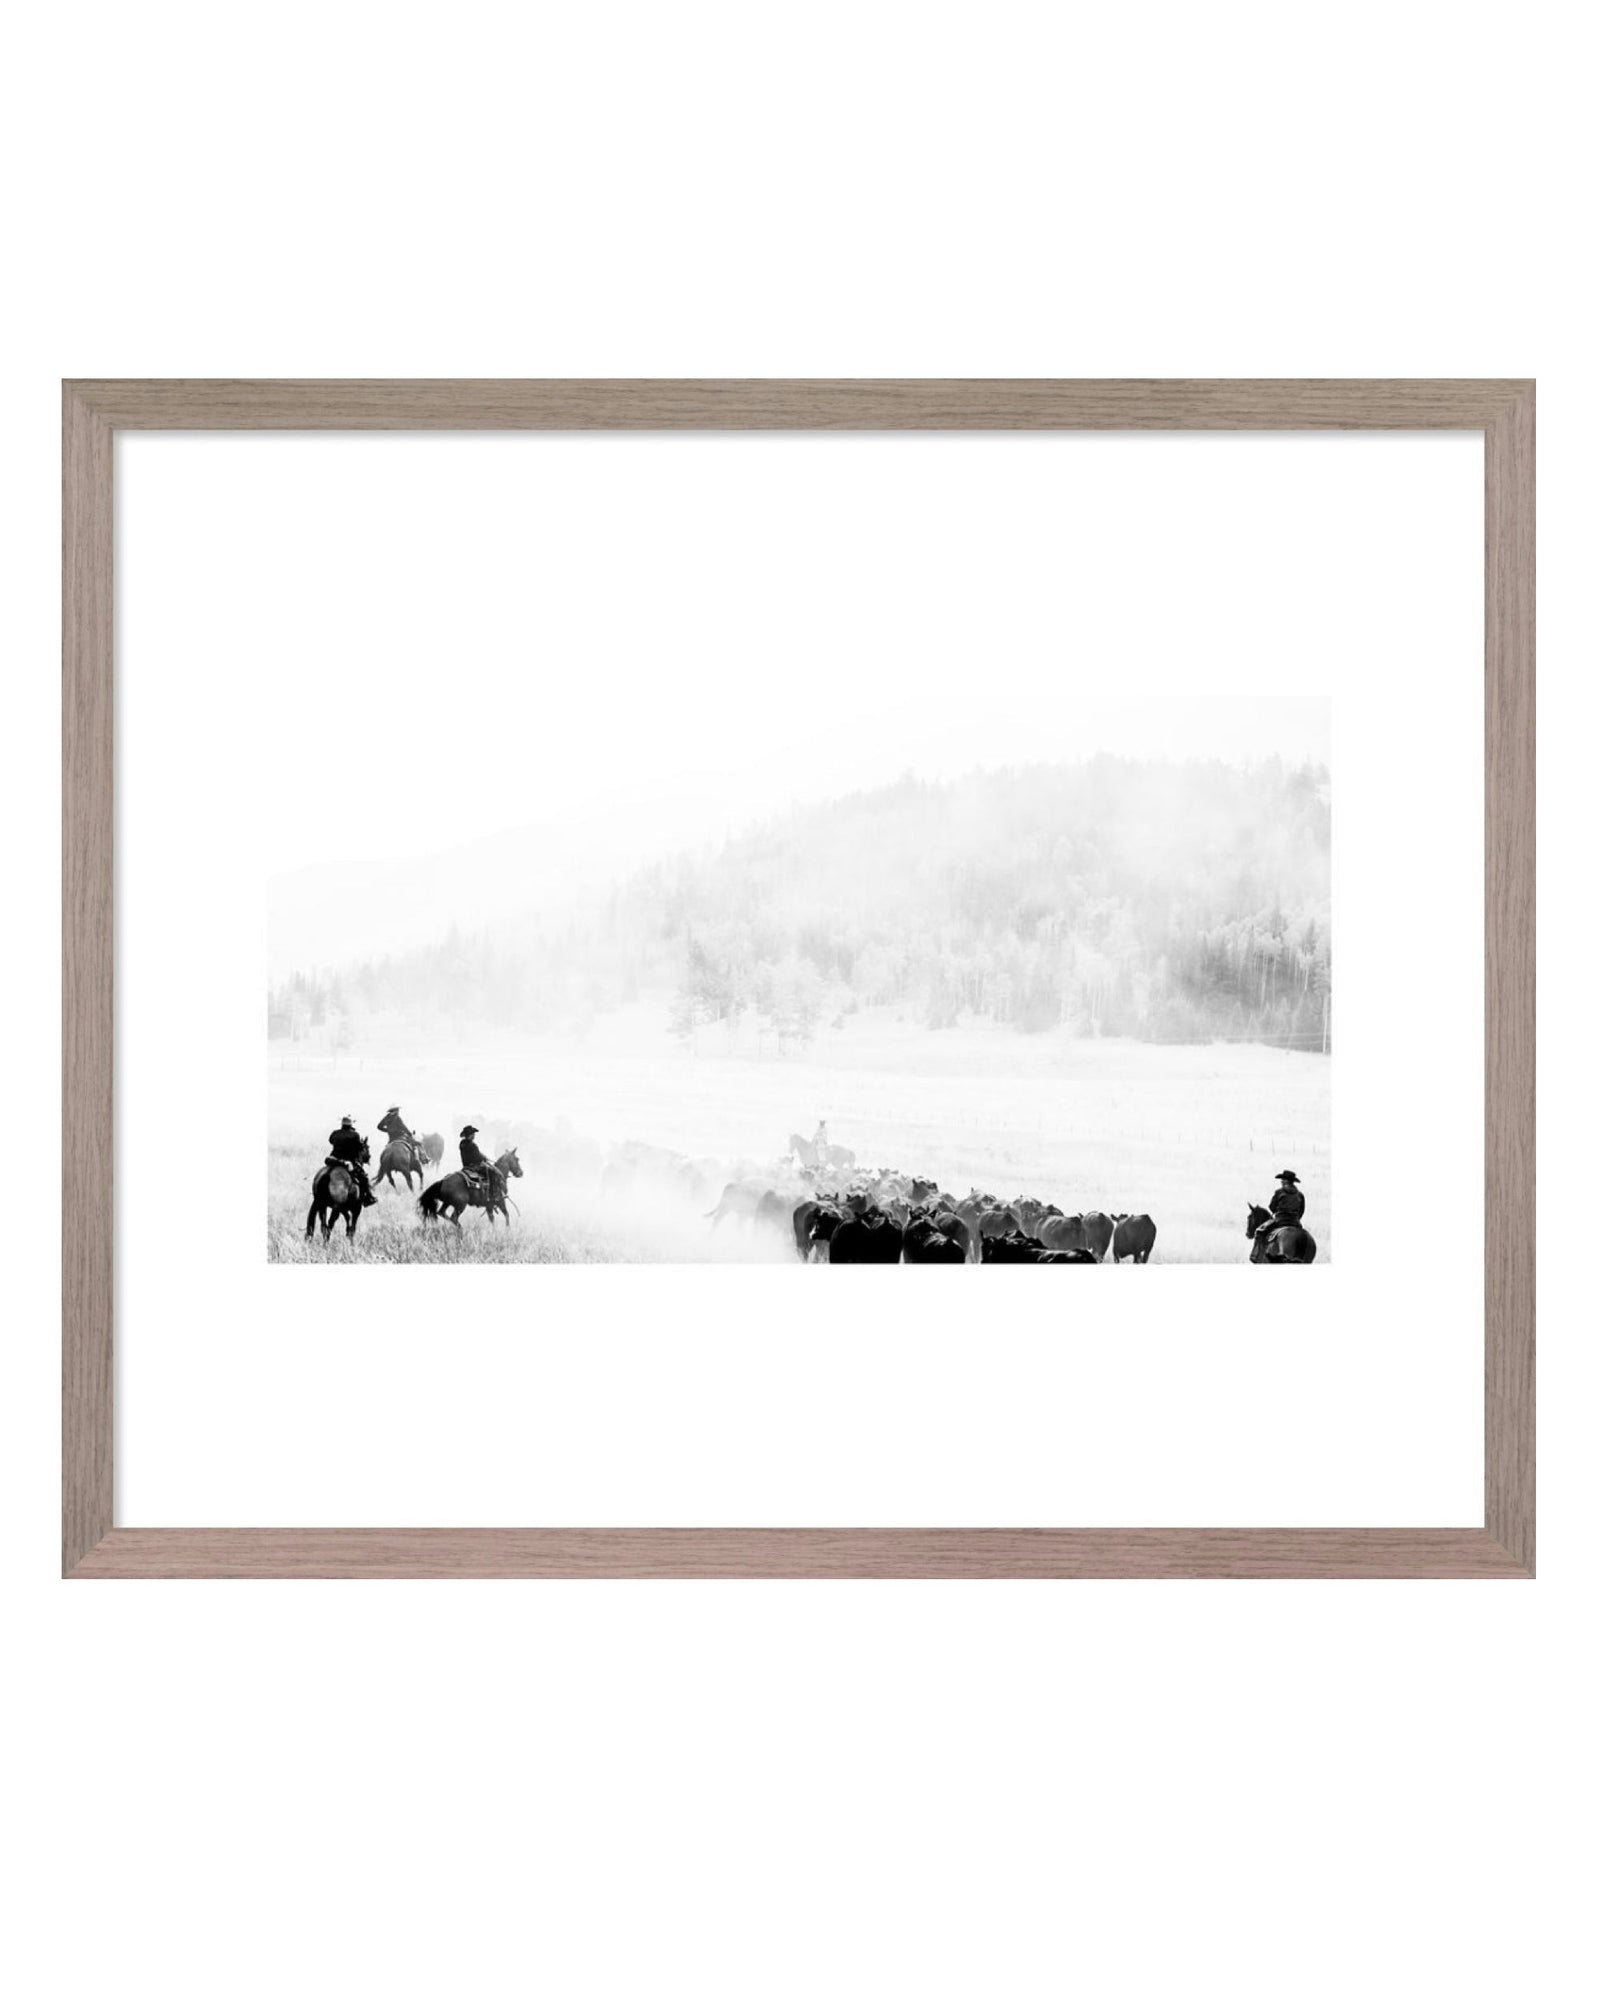 Cattle Drive 1 - Yellowstone Set Photography By Official Yellowstone Set Photographer, Emerson "Paco" Miller  - 16" X 20"